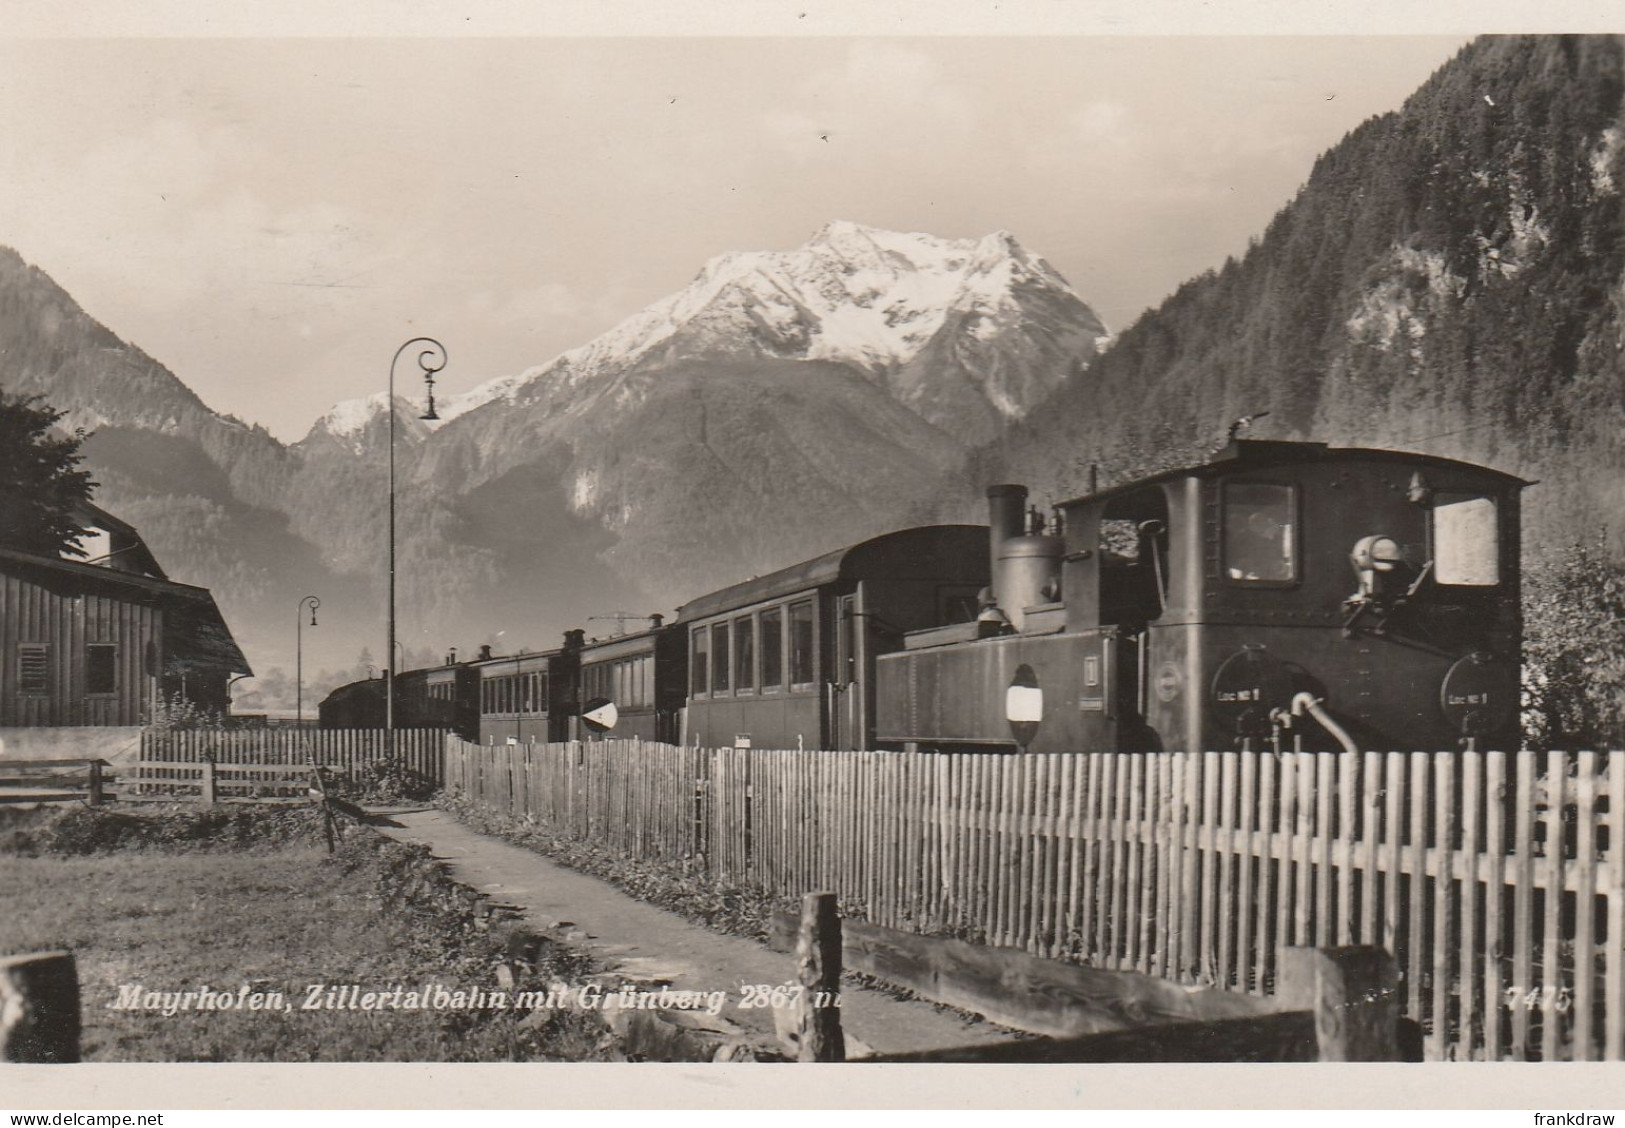 Postcard - Mayrhofen, Zillertaalbahn Mit Grunberg -card No.2867 - Posted But Stamp And Date Stamp Removed Very Good - Ohne Zuordnung